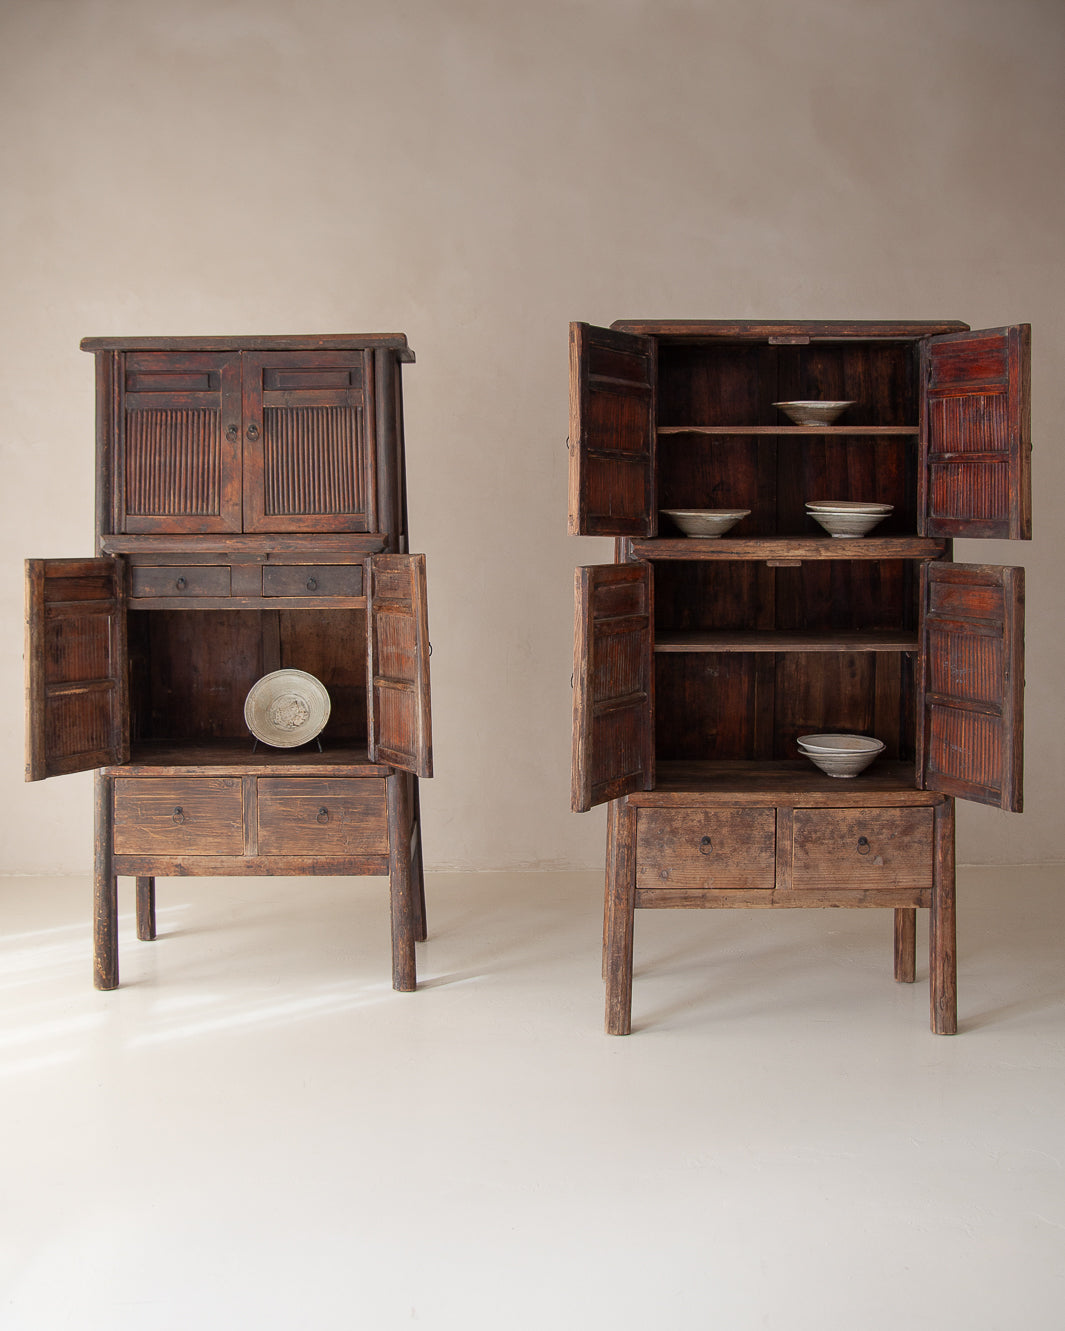 Chinese Cabinet 19th century